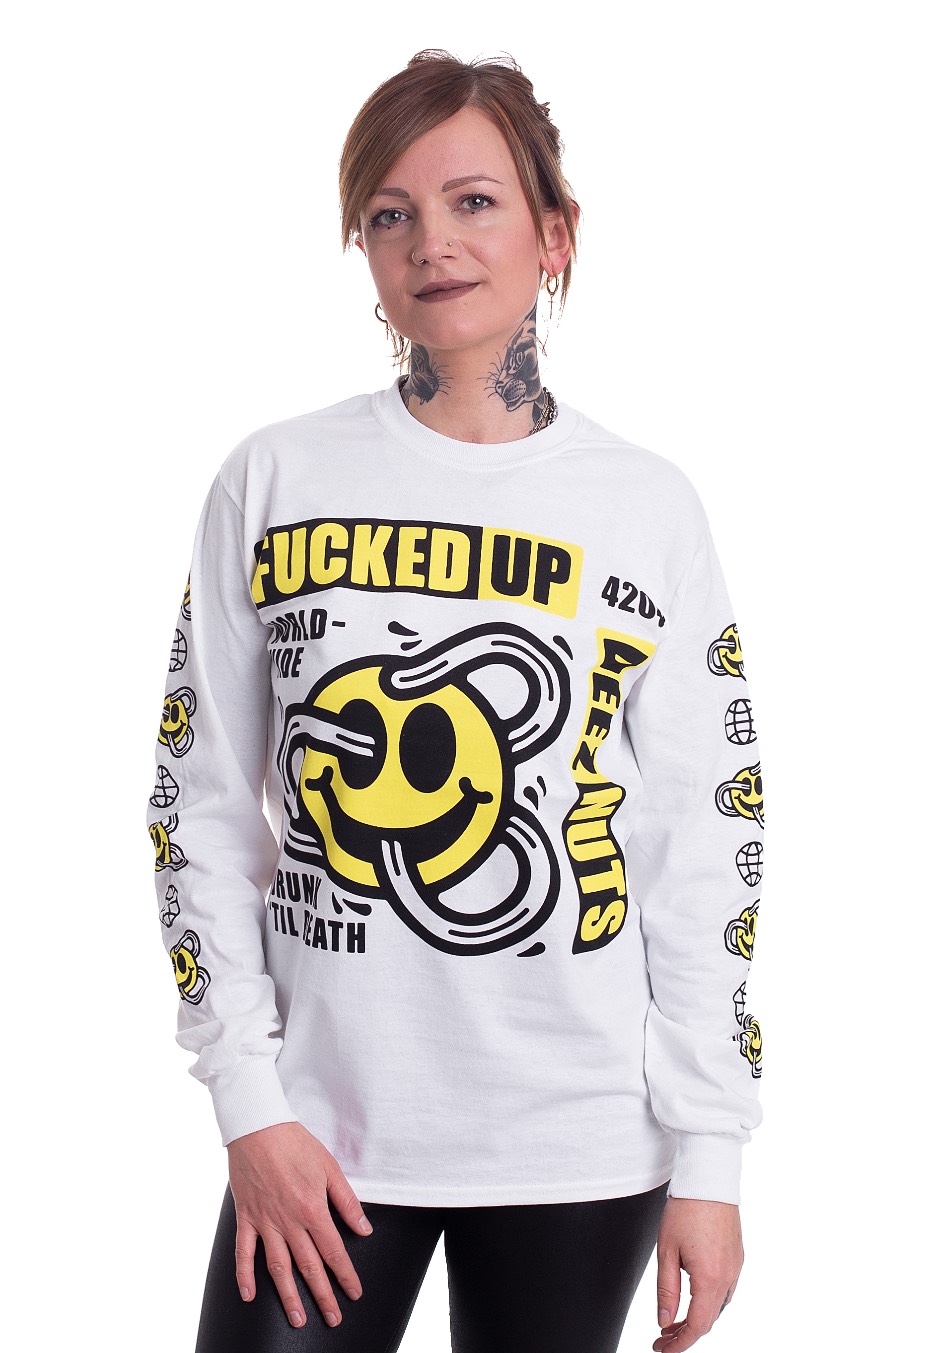 Deez Nuts - Fucked Up White - Longsleeves